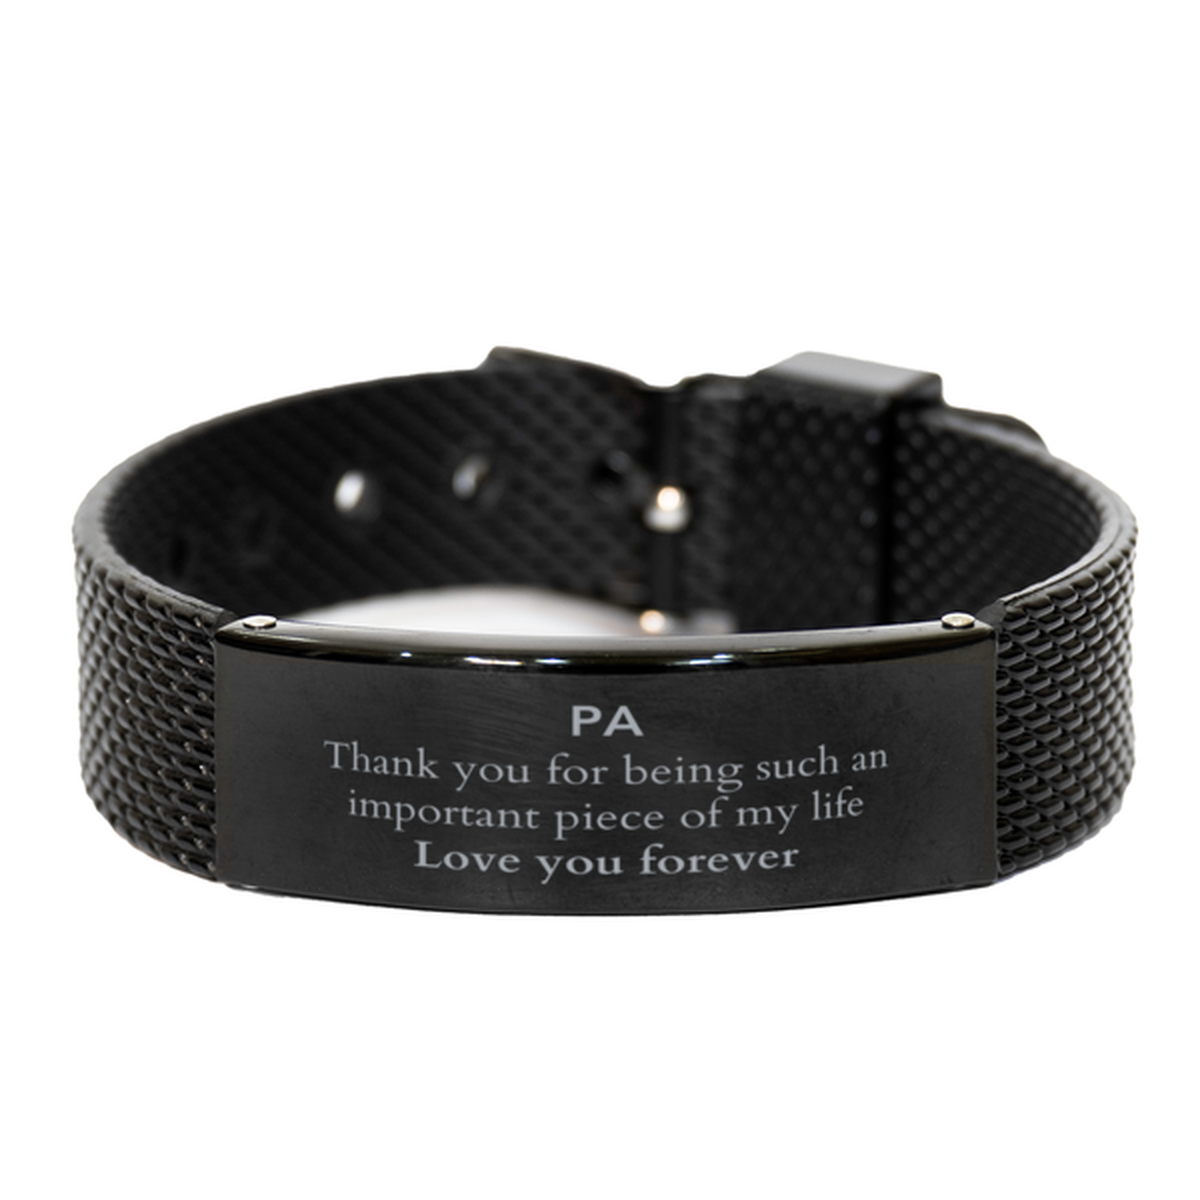 Appropriate Pa Black Shark Mesh Bracelet Epic Birthday Gifts for Pa Thank you for being such an important piece of my life Pa Christmas Mothers Fathers Day